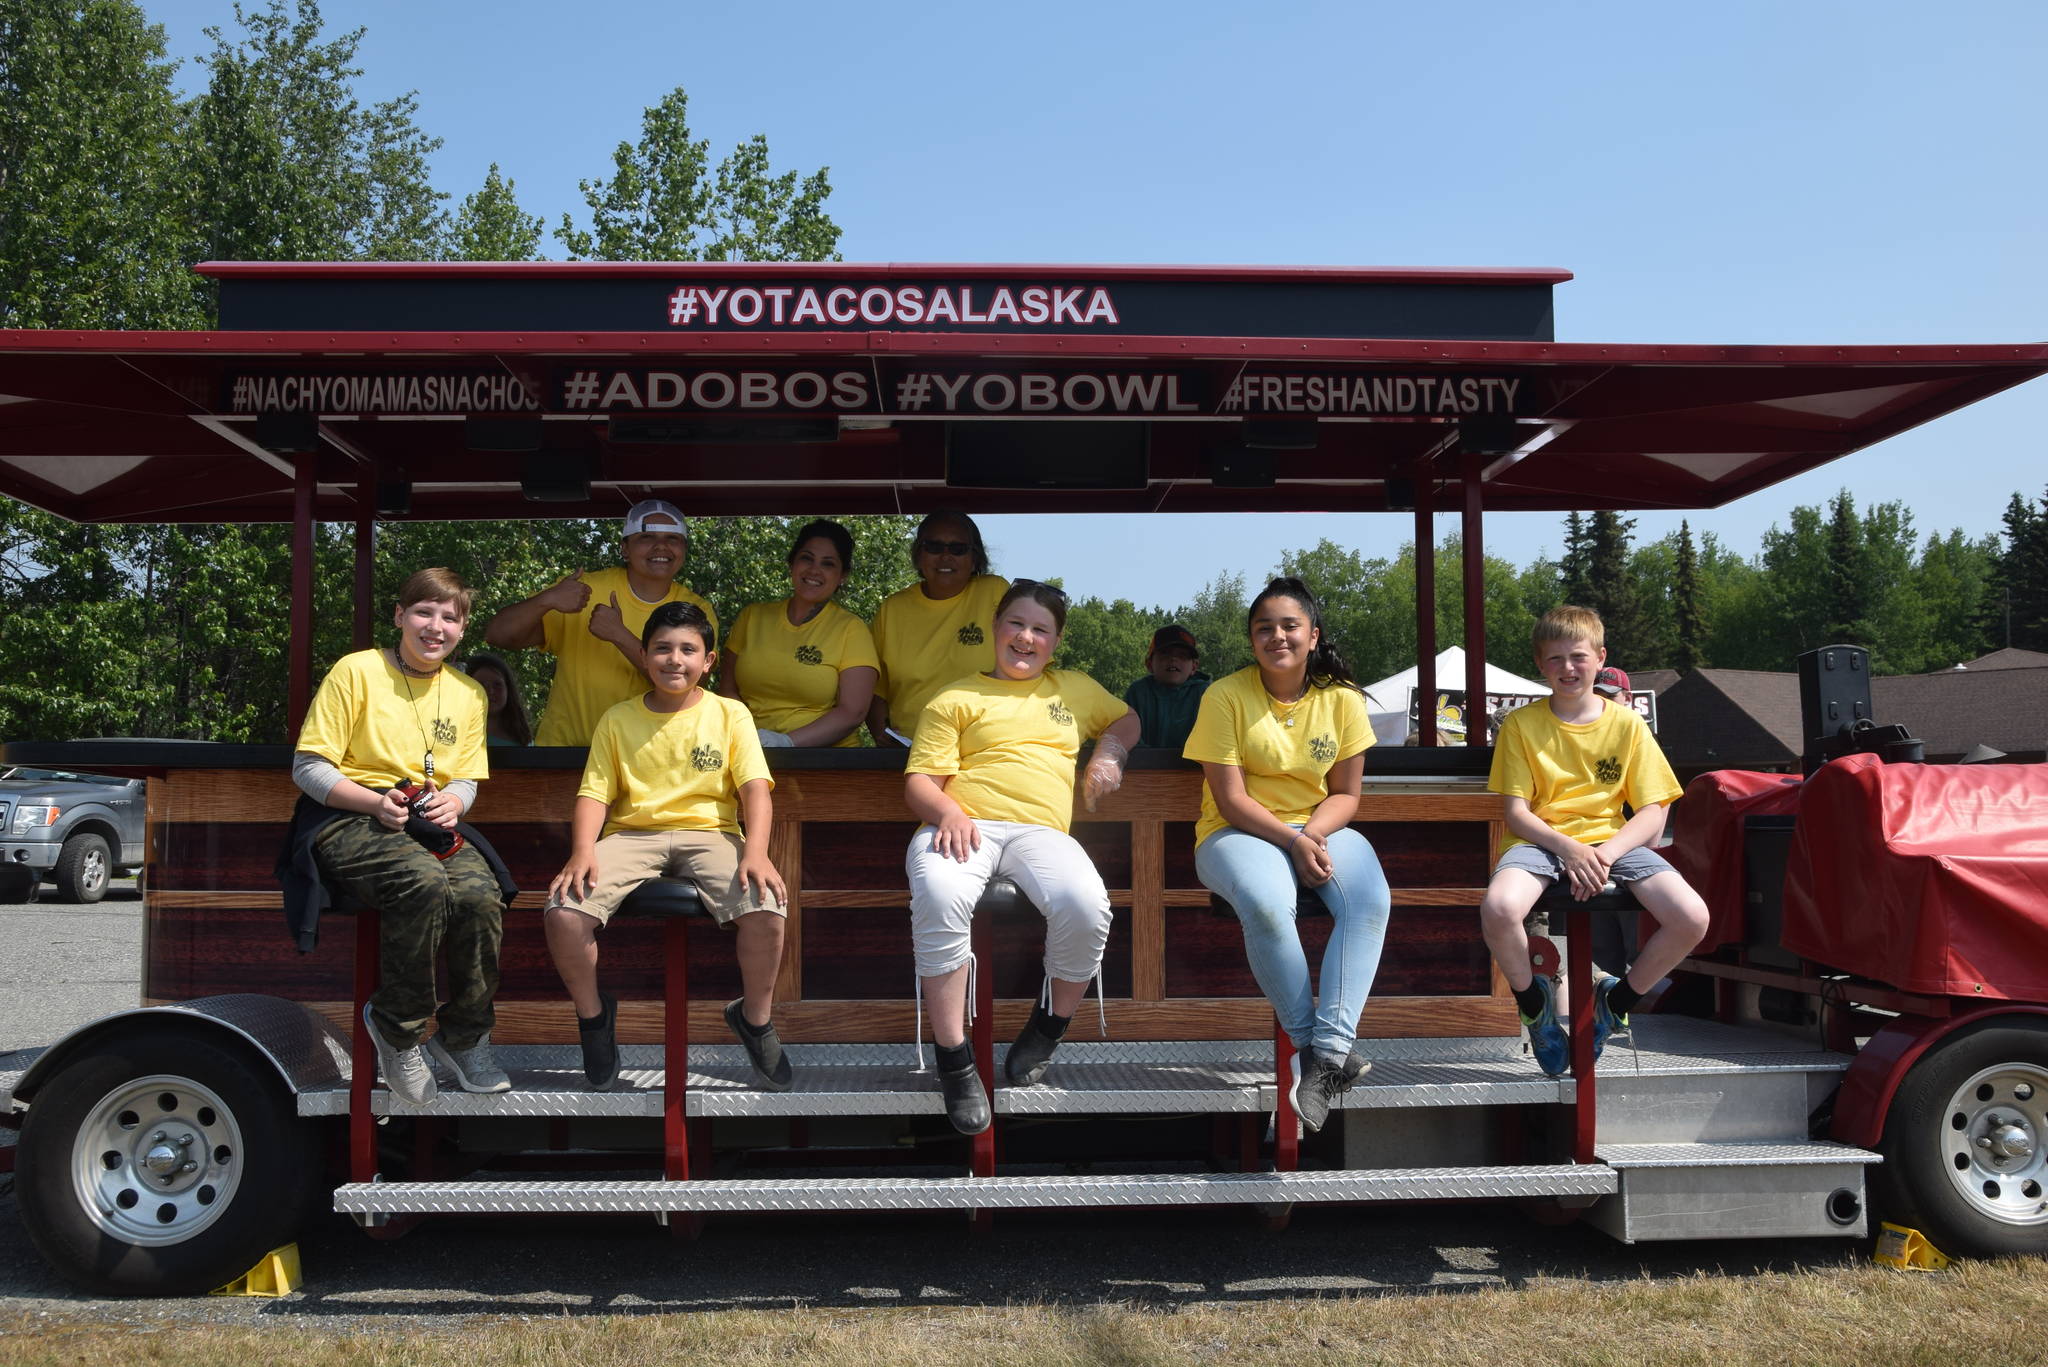 From left, front, Aries Lyons, Logan Amaya, Autumn Bass, Alexa Menzel and Tucker Challans pose with the Yo! Tacos crew during Lemonade Day in Soldotna, Alaska on June 29, 2019. (Photo by Brian Mazurek/Peninsula Clarion)